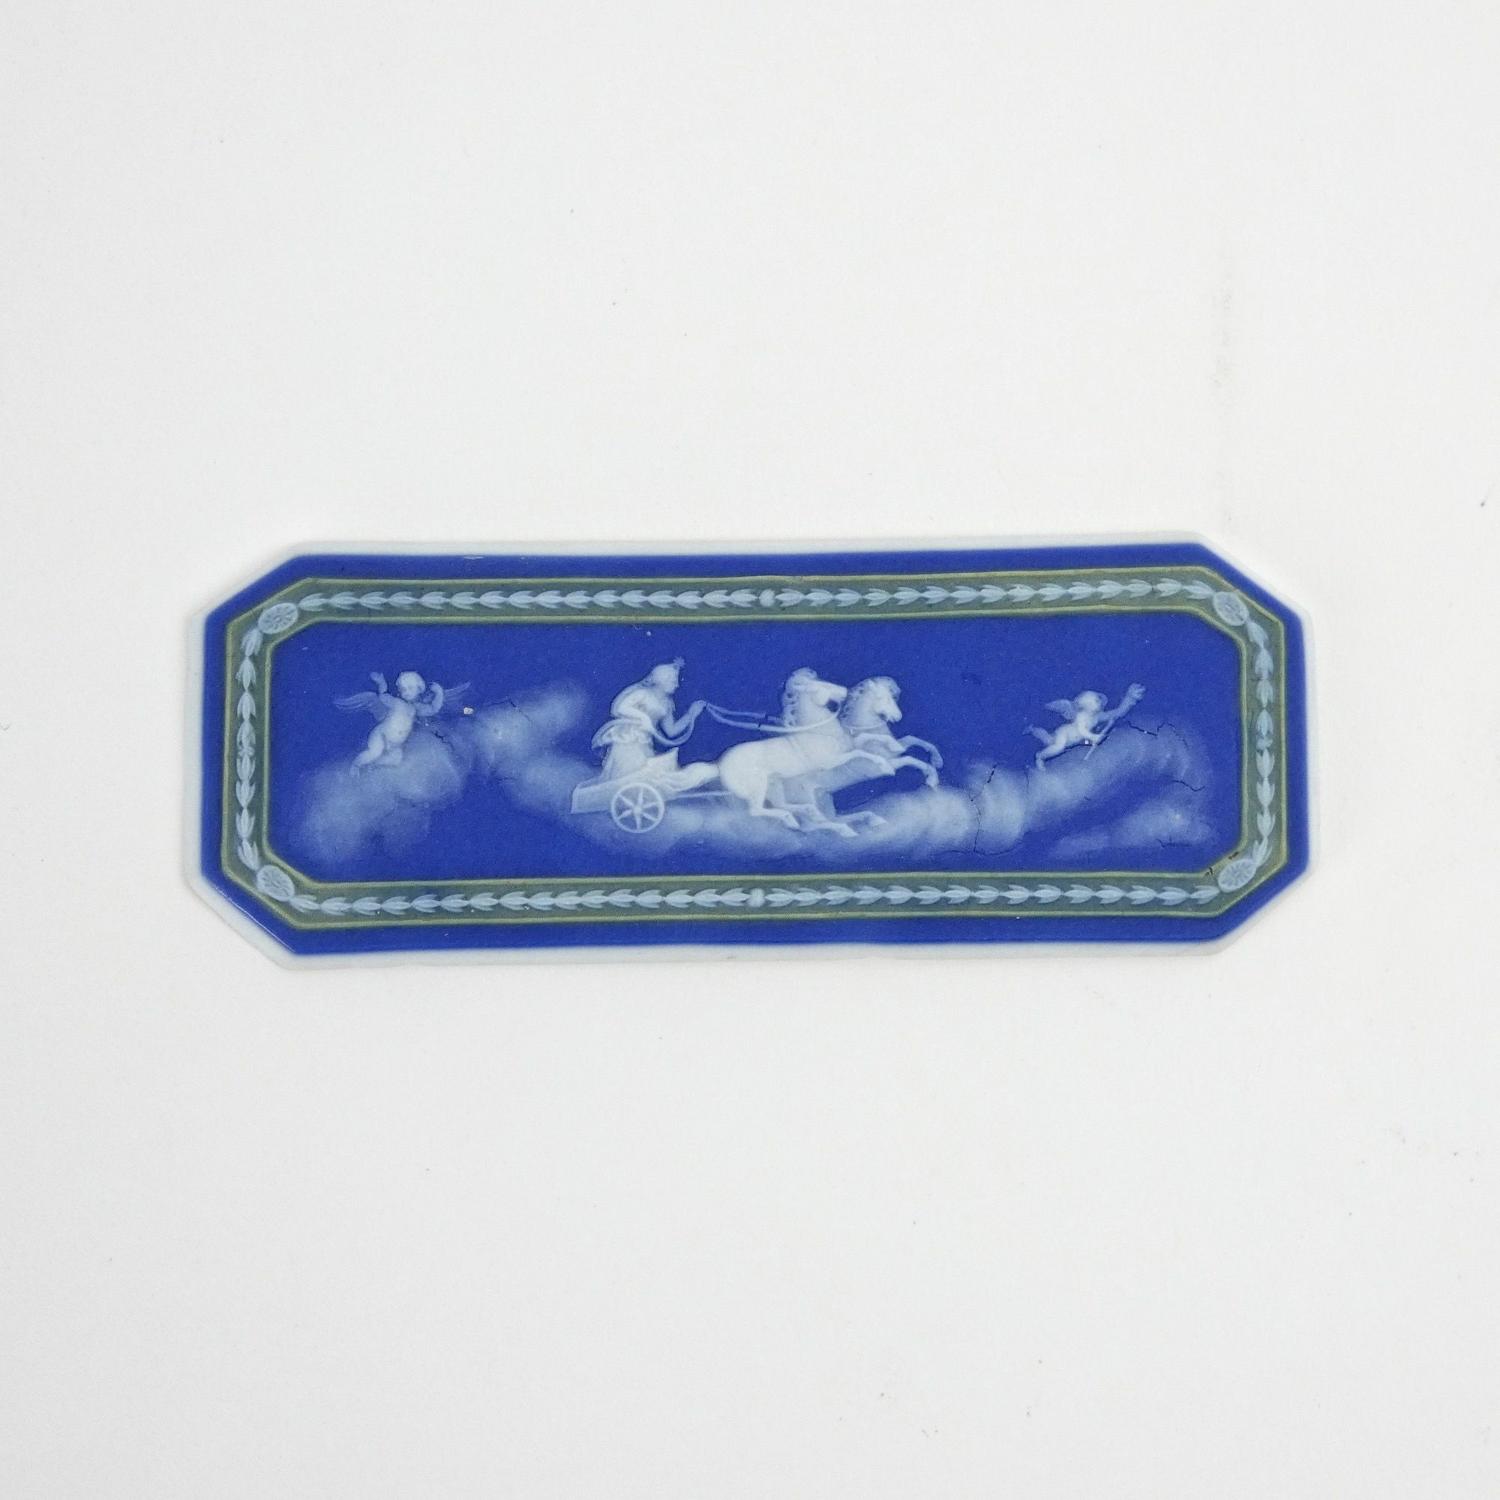 18th century, Wedgwood, blue and green cameo